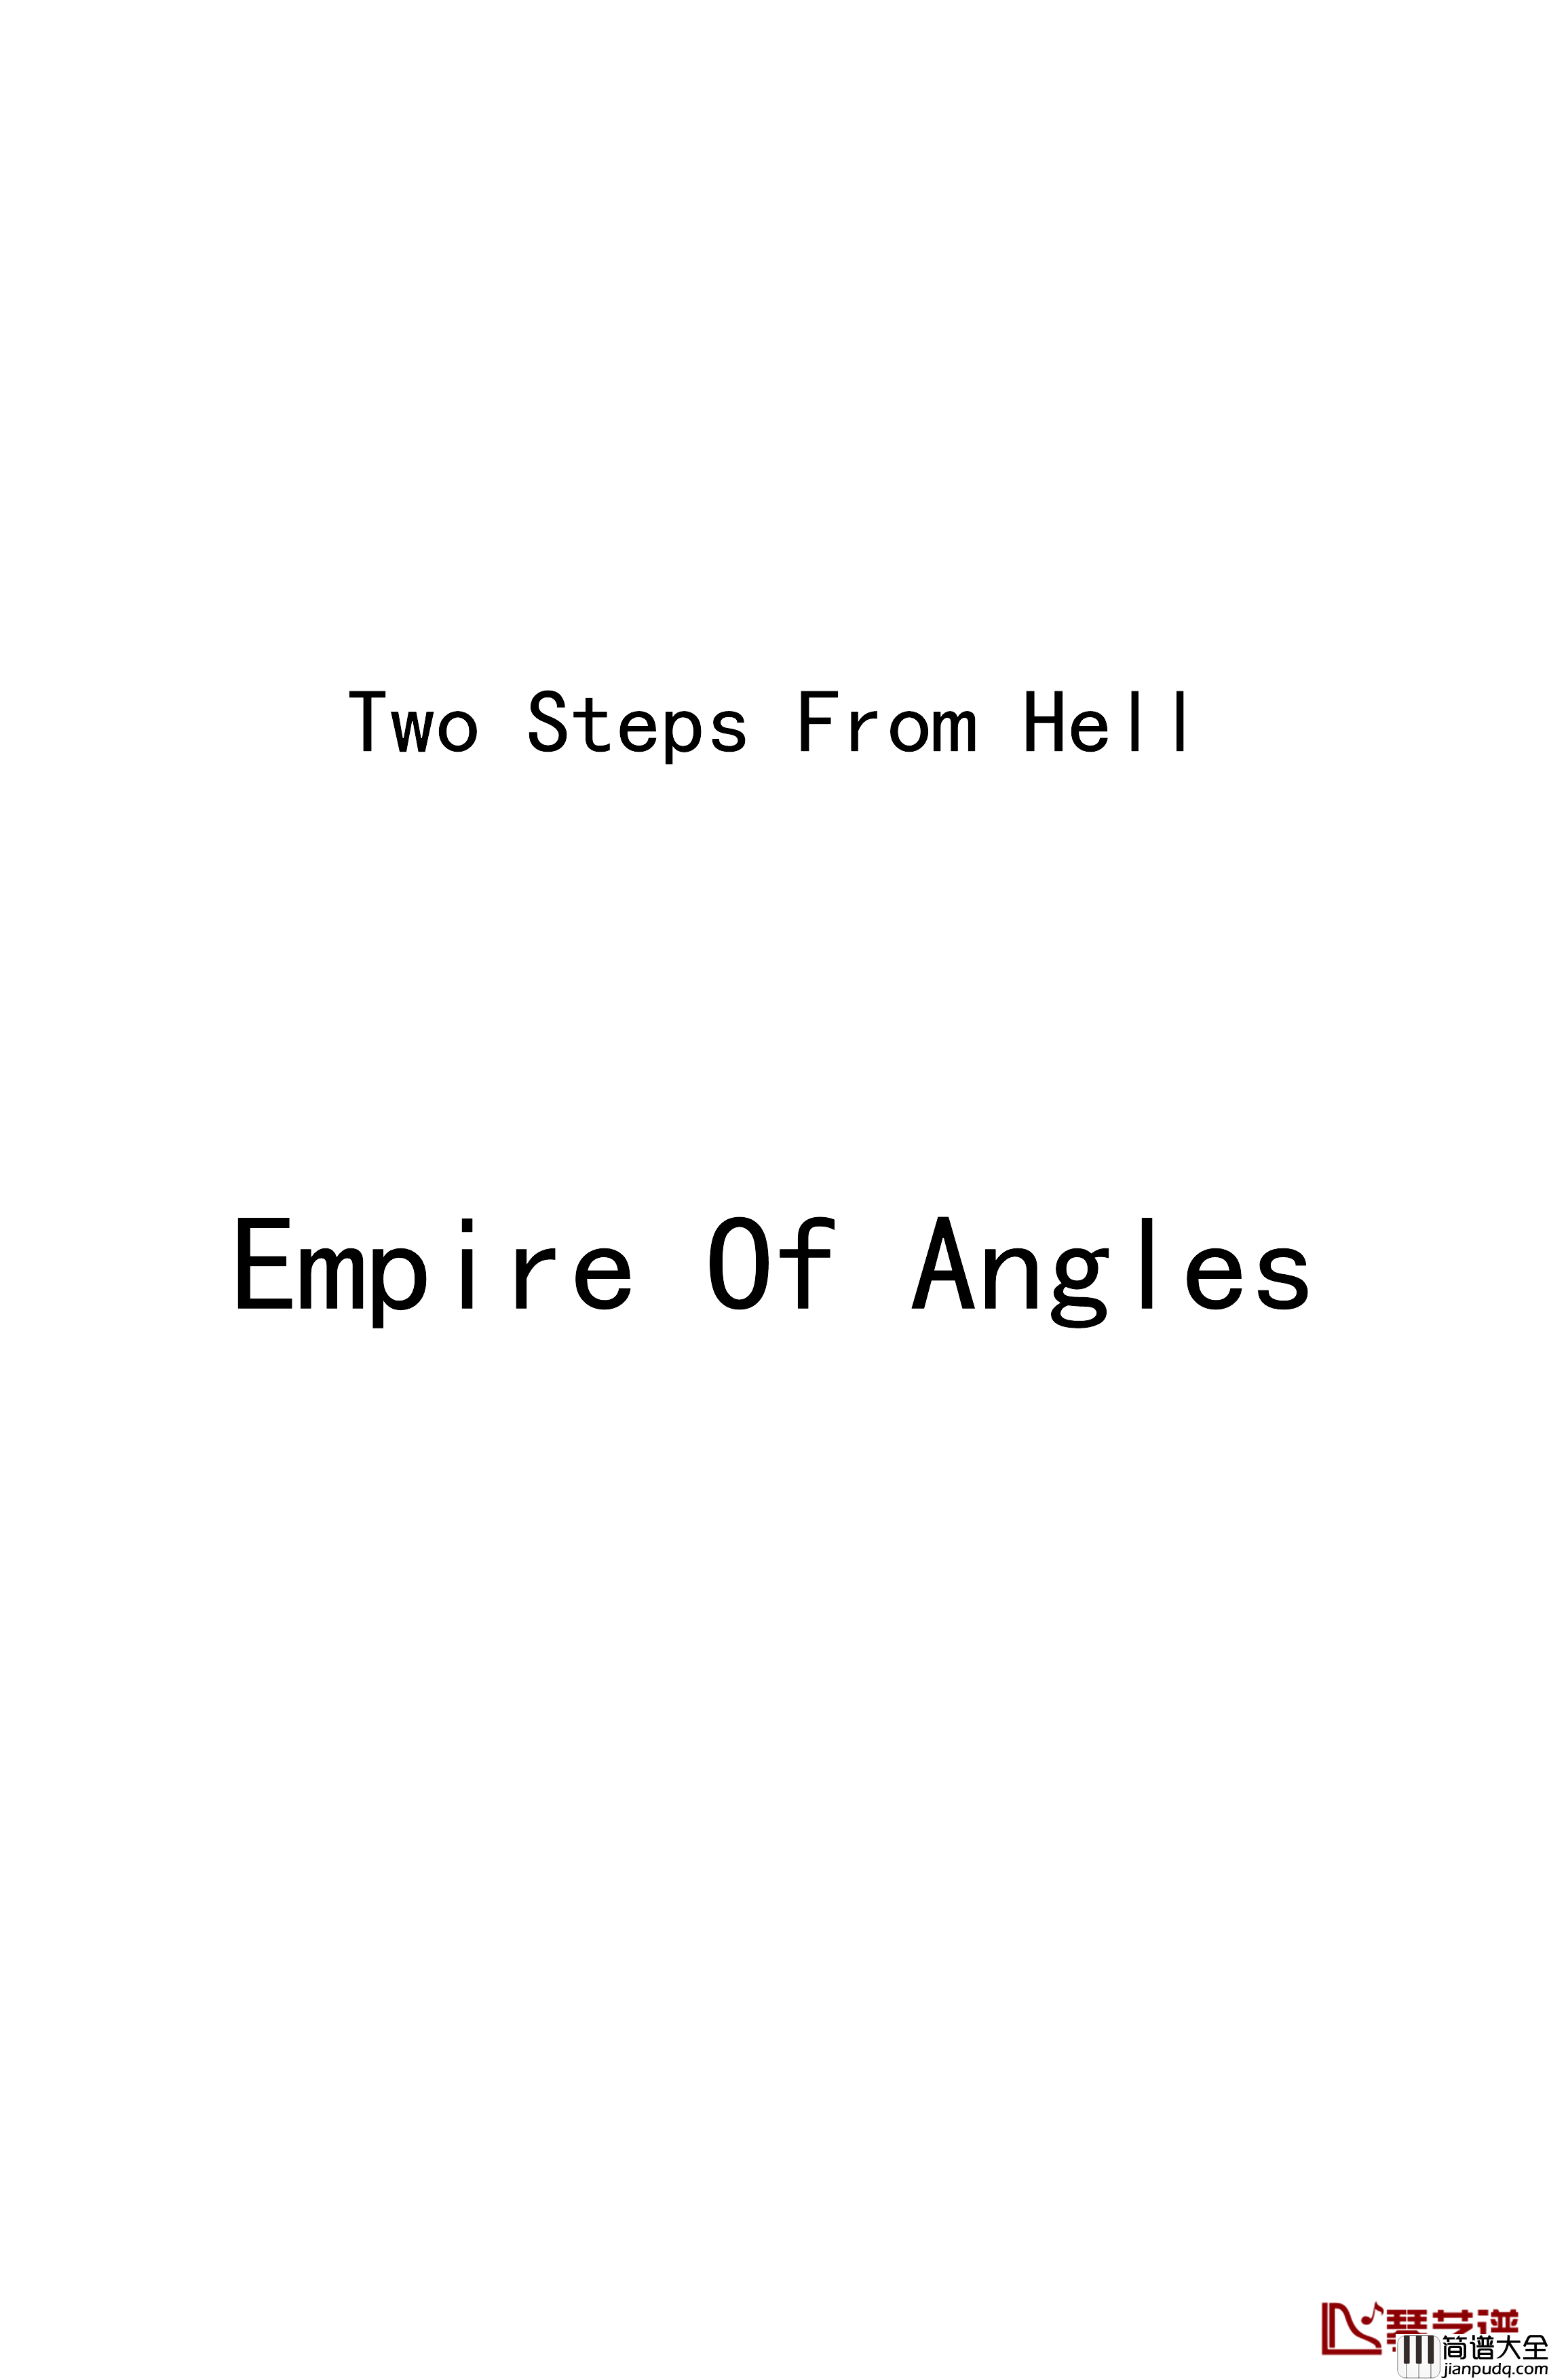 Empire_Of_Angles钢琴谱_Two_Steps_From_Hell